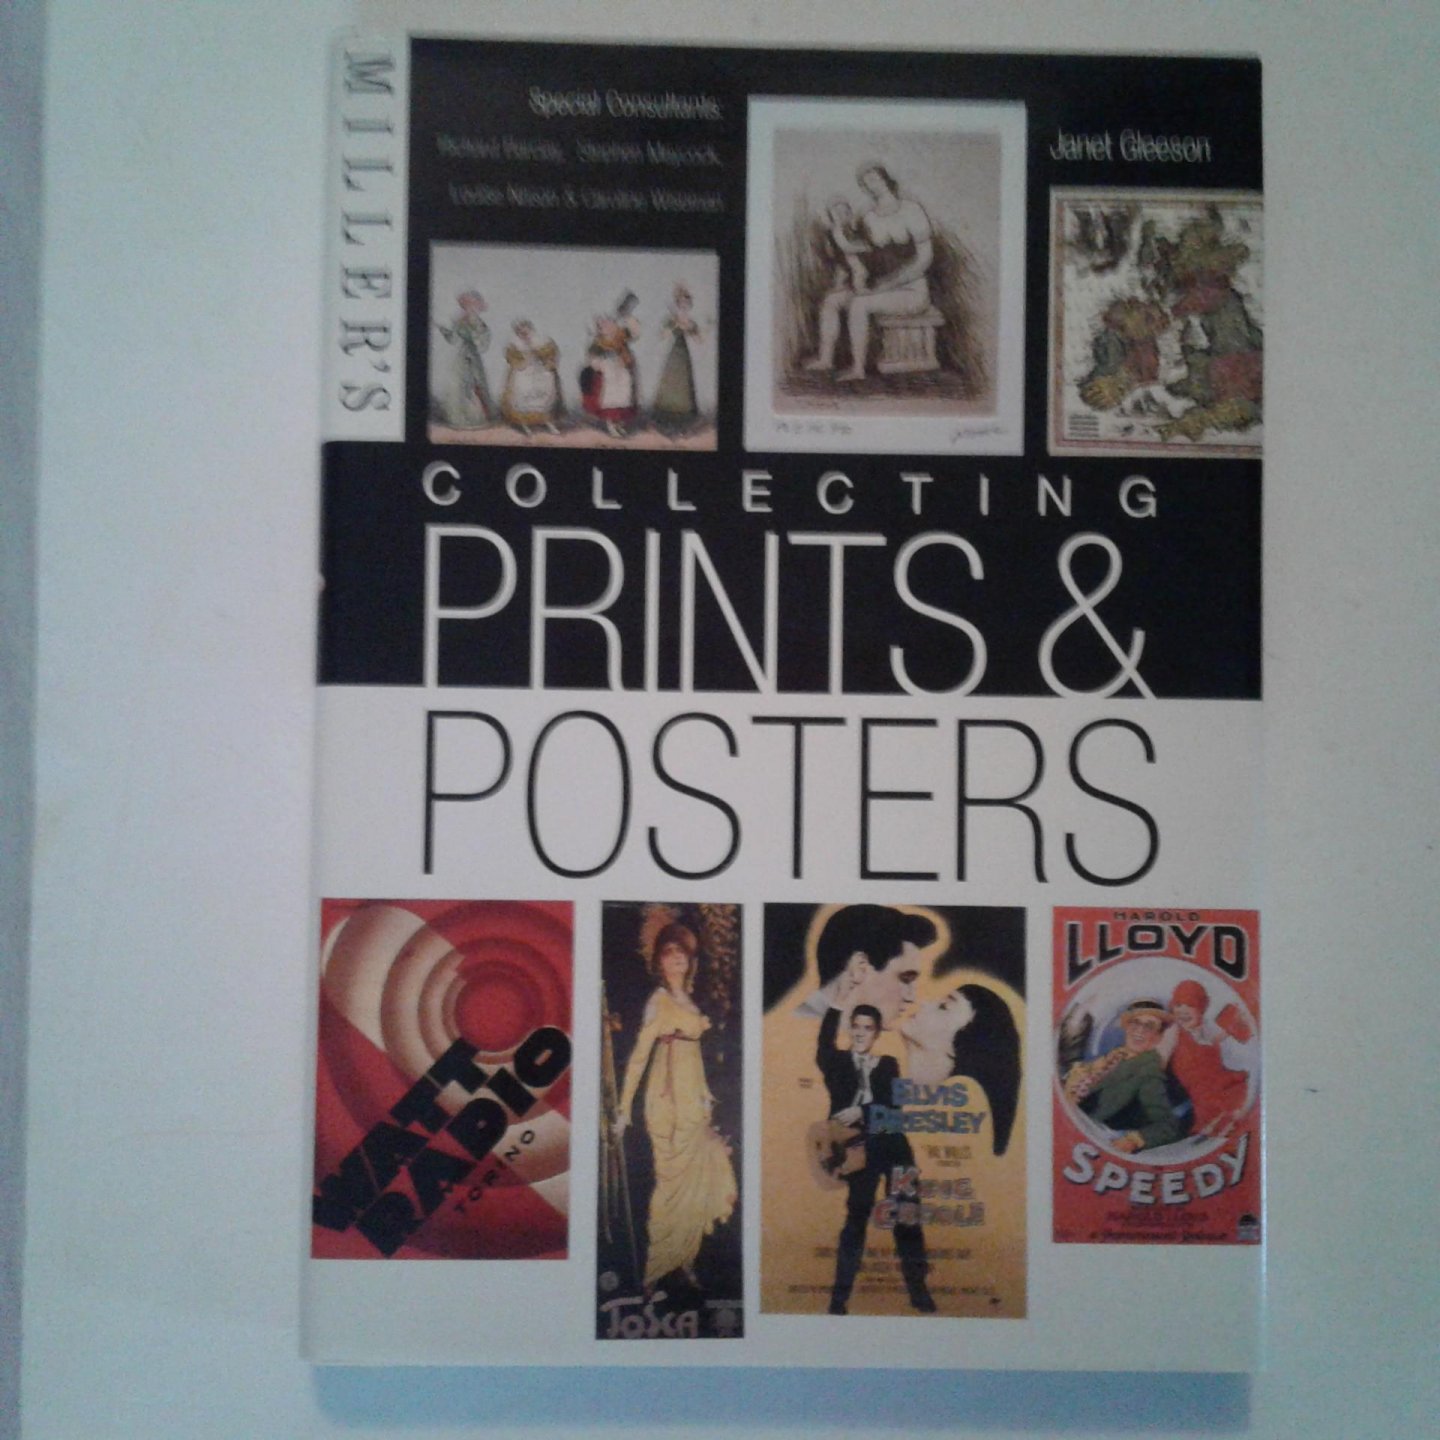 Gleeson, Janet - Collecting Prints & Posters ; Miller's Collecting Prints & Posters